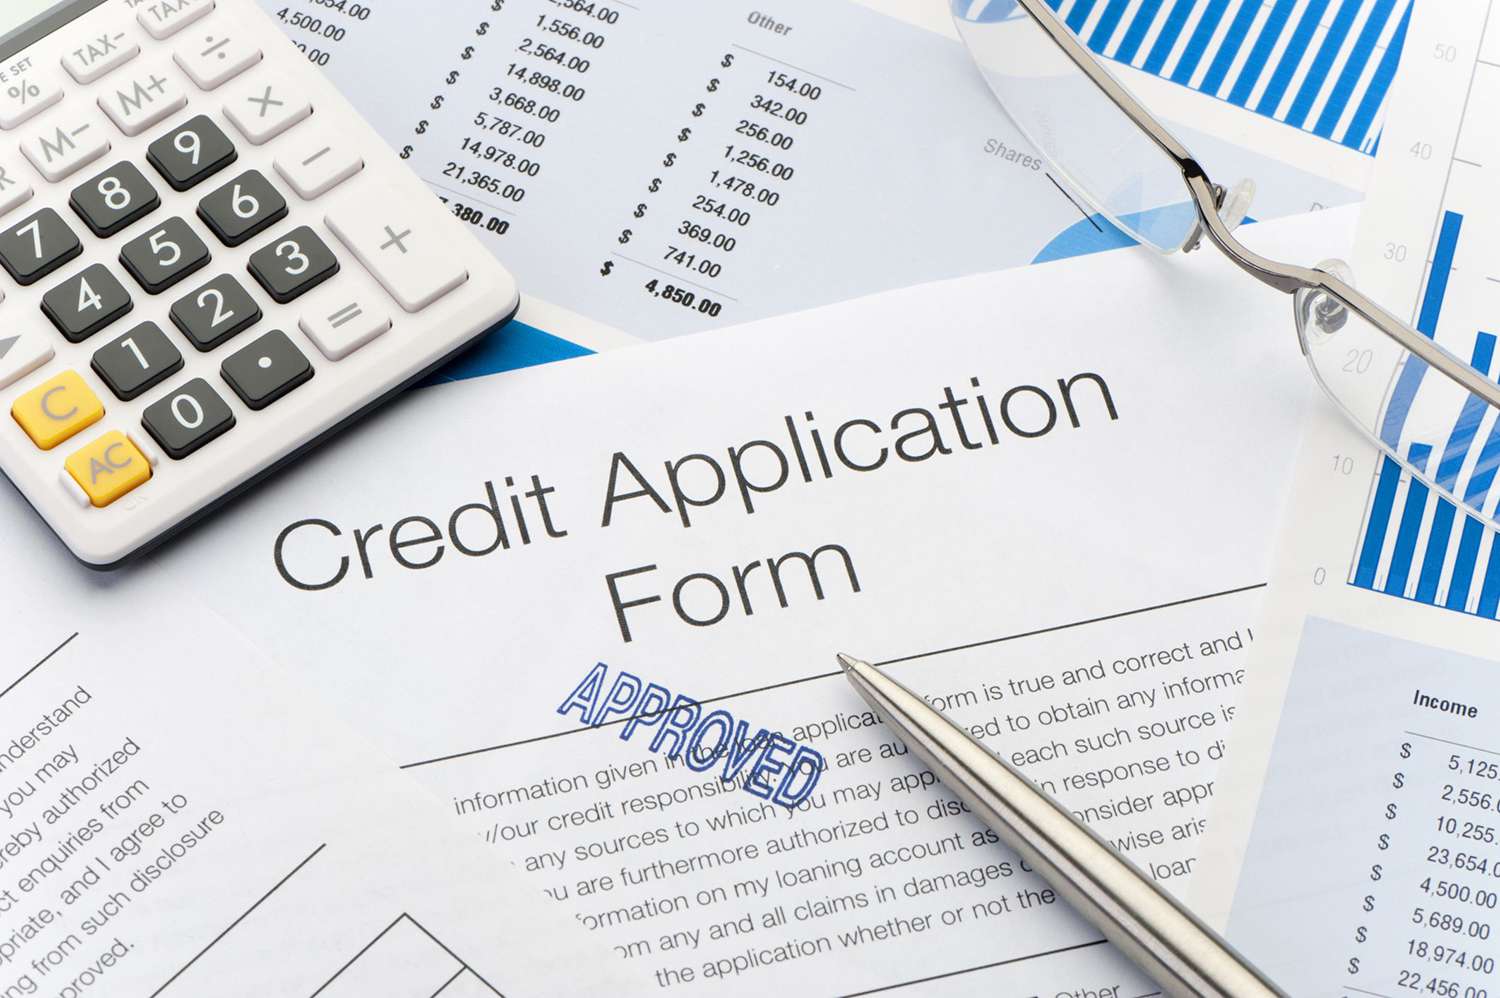 How To Fill Out A Credit Application